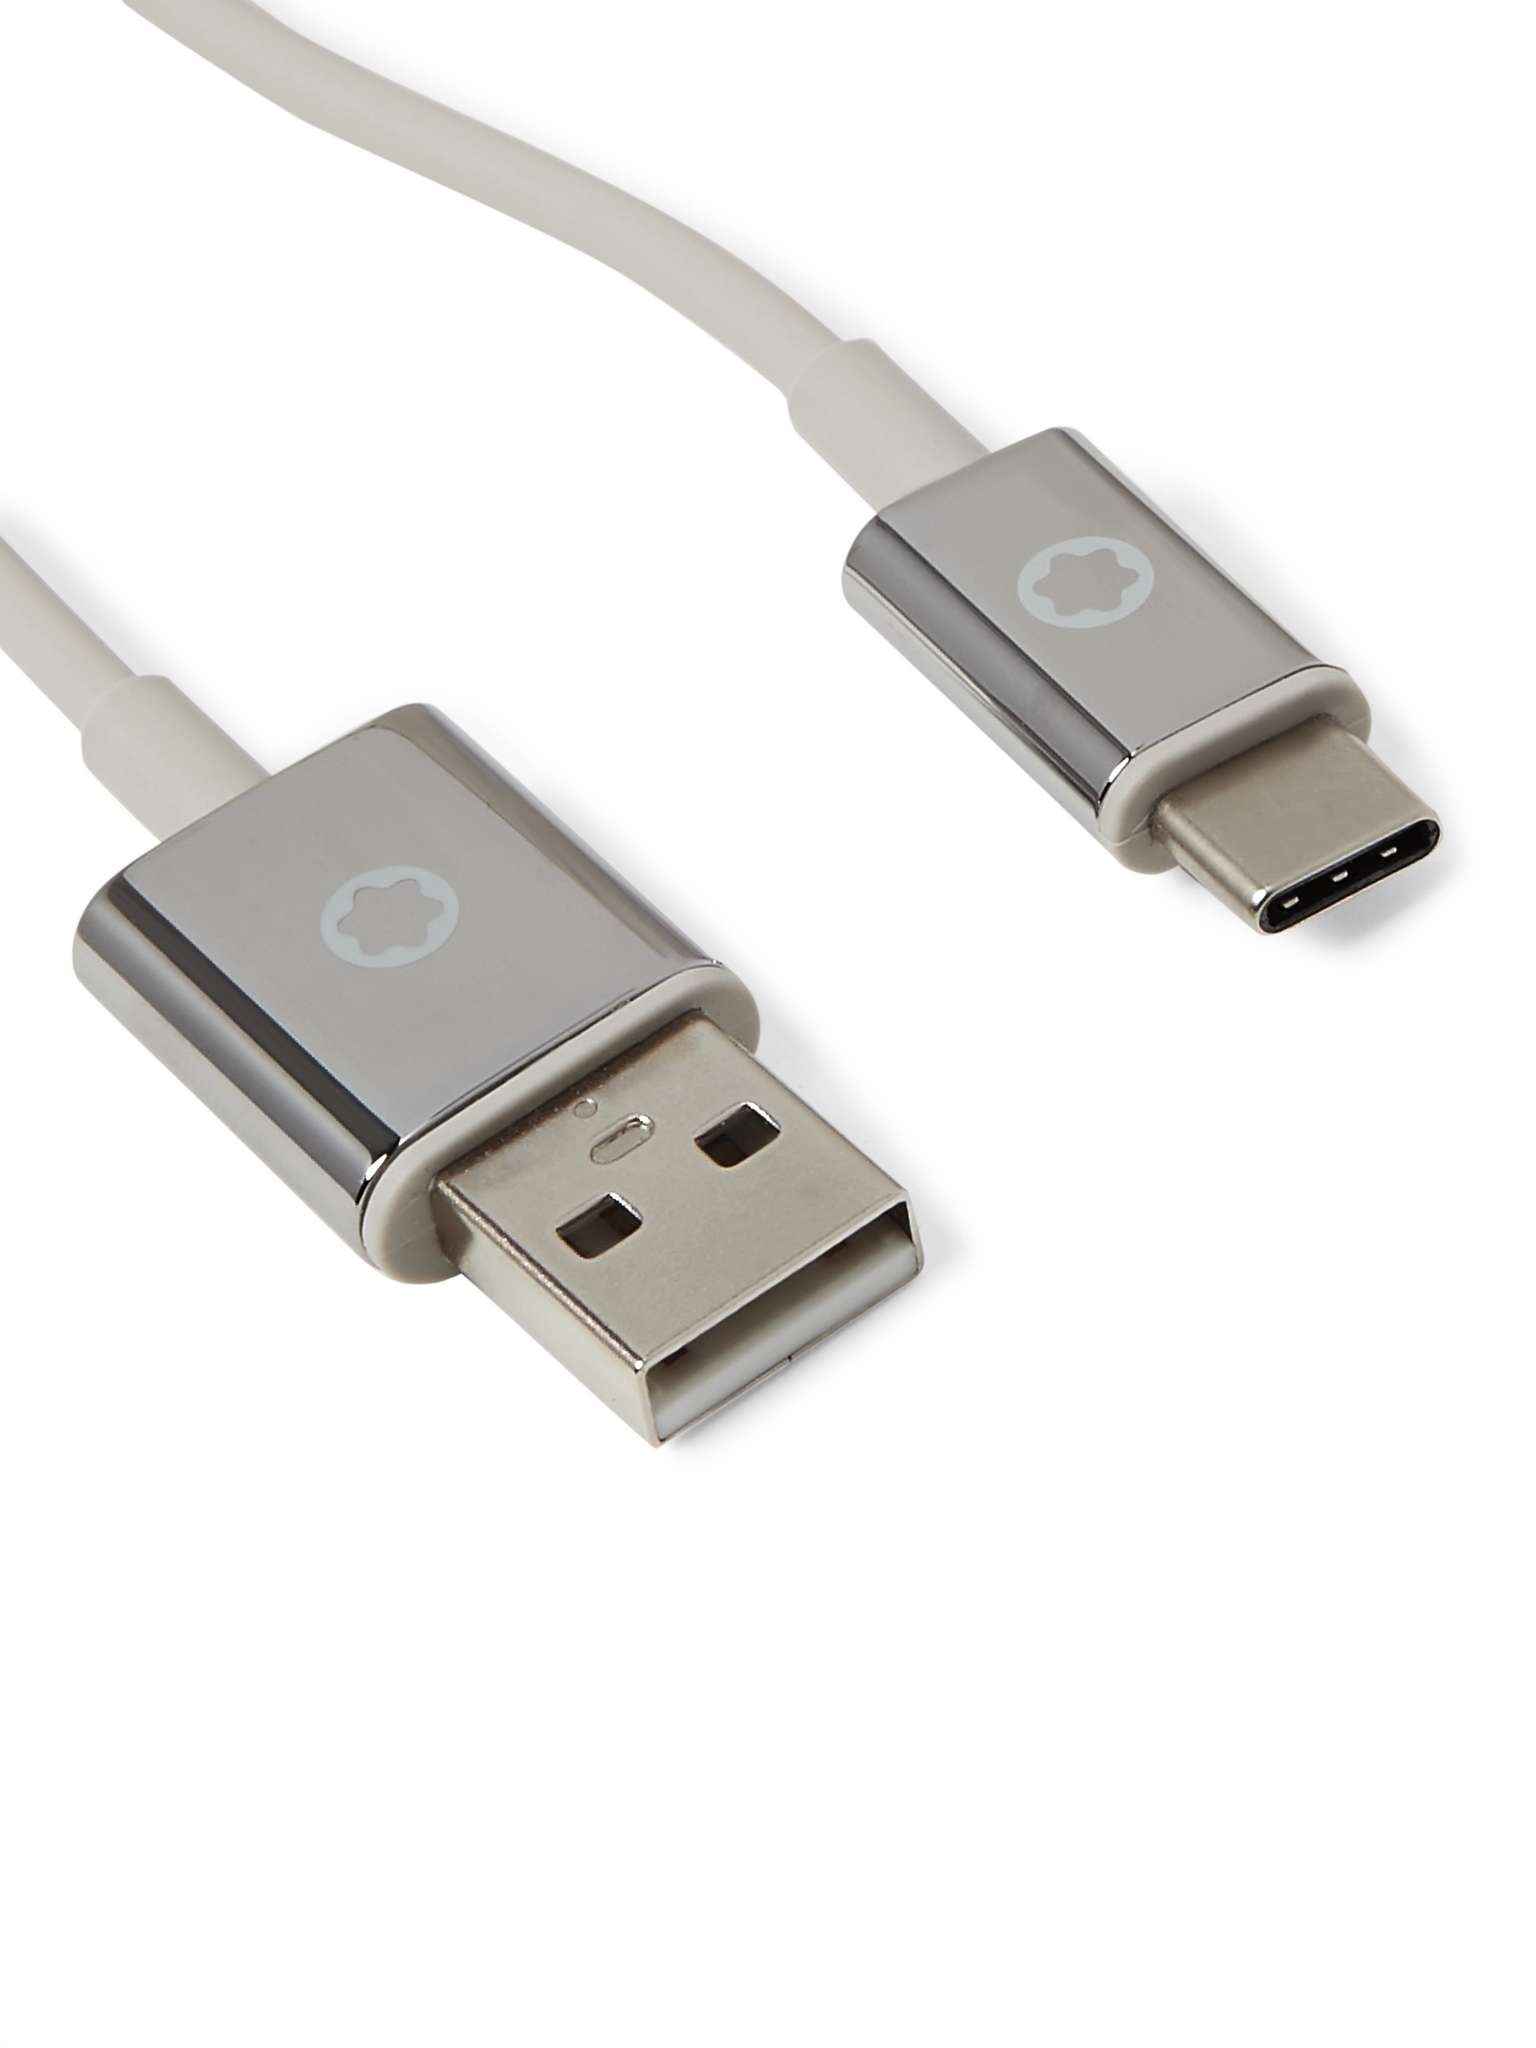 MB 01 Travel Charger and Cable Set - 2